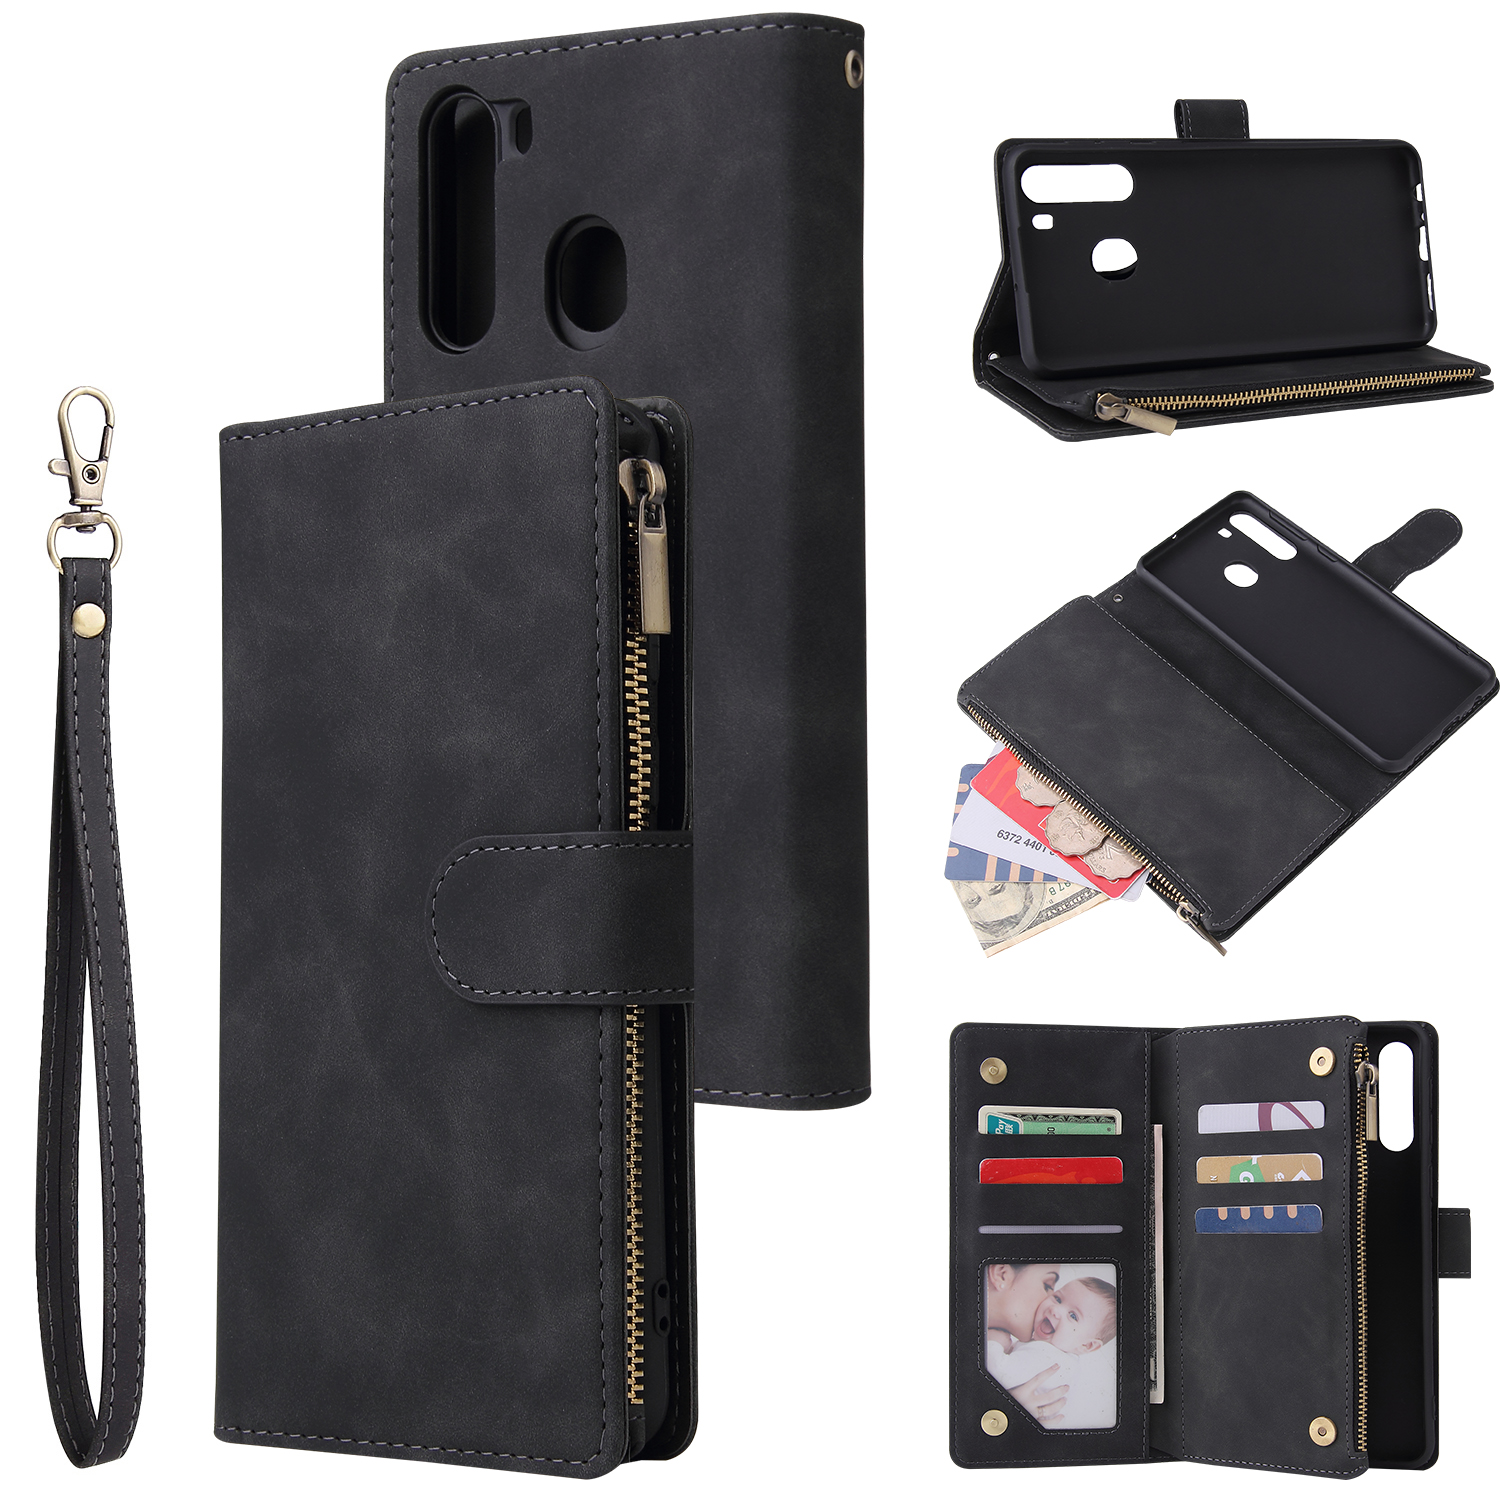 For Samsung A21 Mobile Phone Case Smartphone Shell Wallet Design Zipper Closure Overall Protection Cover  1 black